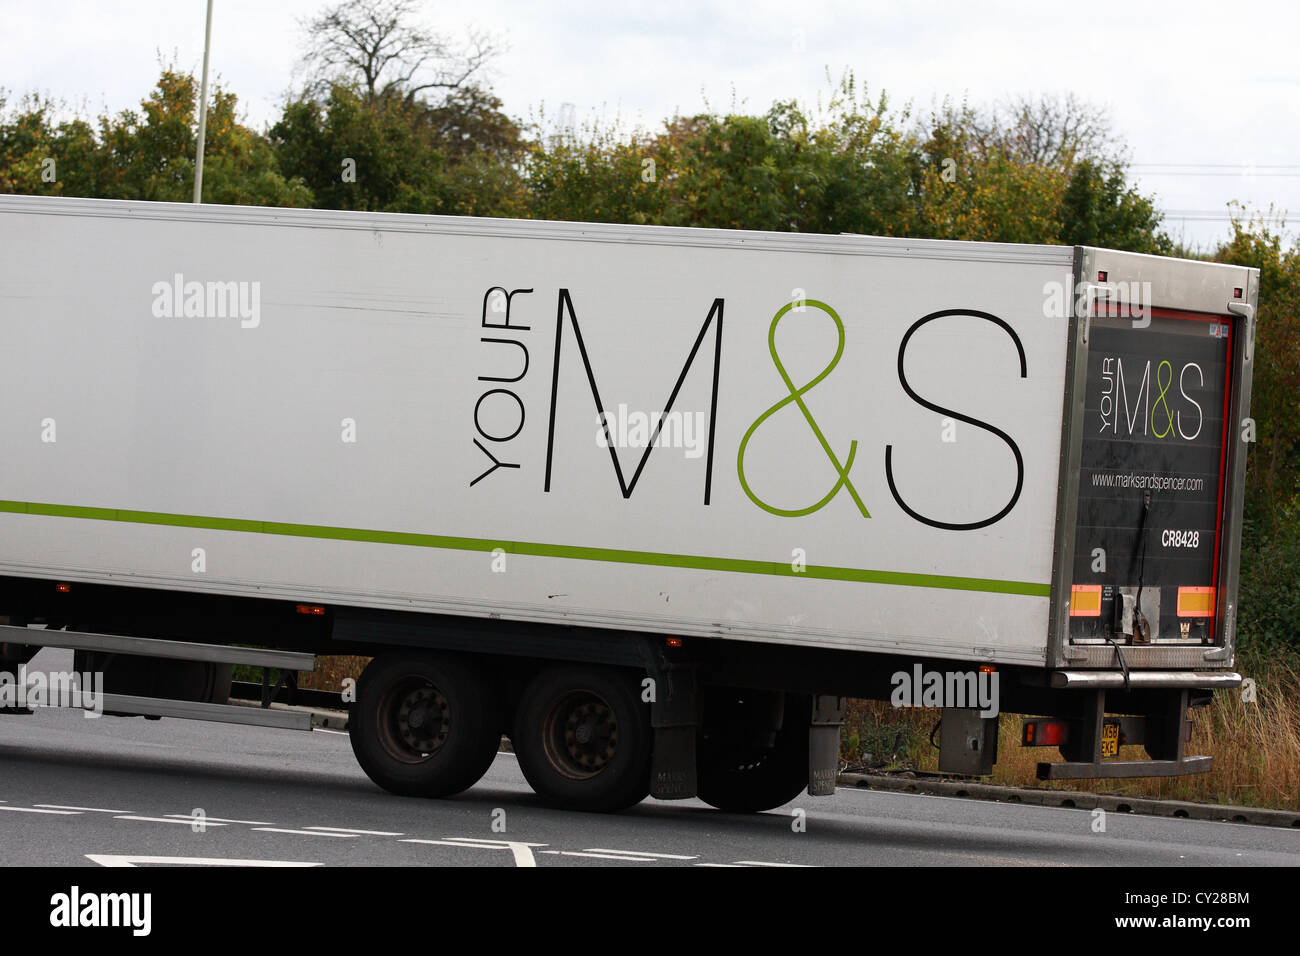 Part of an 'M&S' truck traveling along a road in England Stock Photo